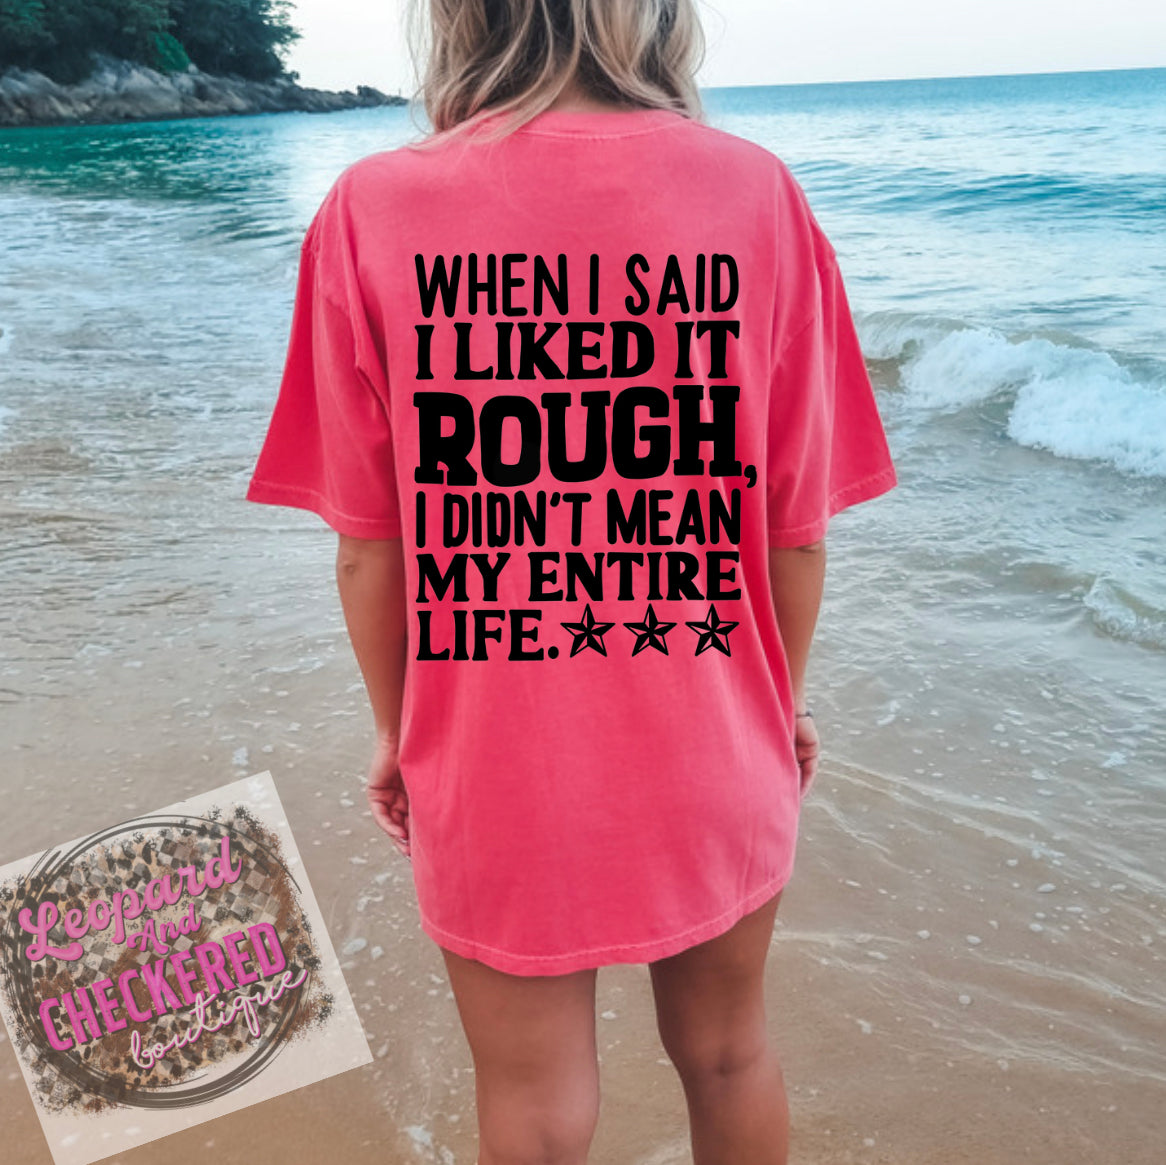 When I said I liked it rough I didn’t mean my entire life Tshirt